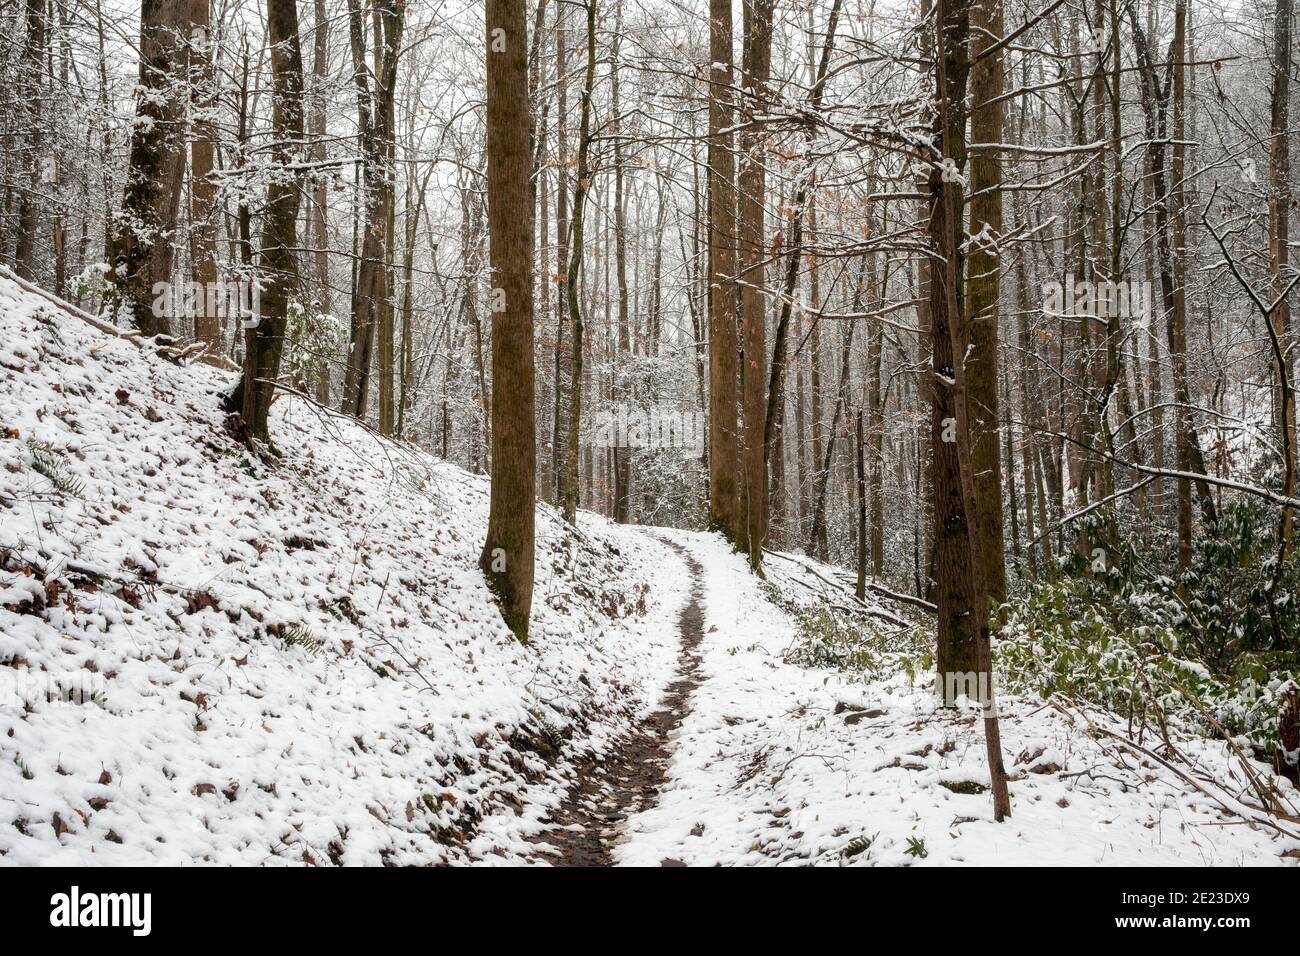 Snowy forest trail - Sycamore Cove Trail - Pisgah National Forest, Brevard, North Carolina, USA Stock Photo